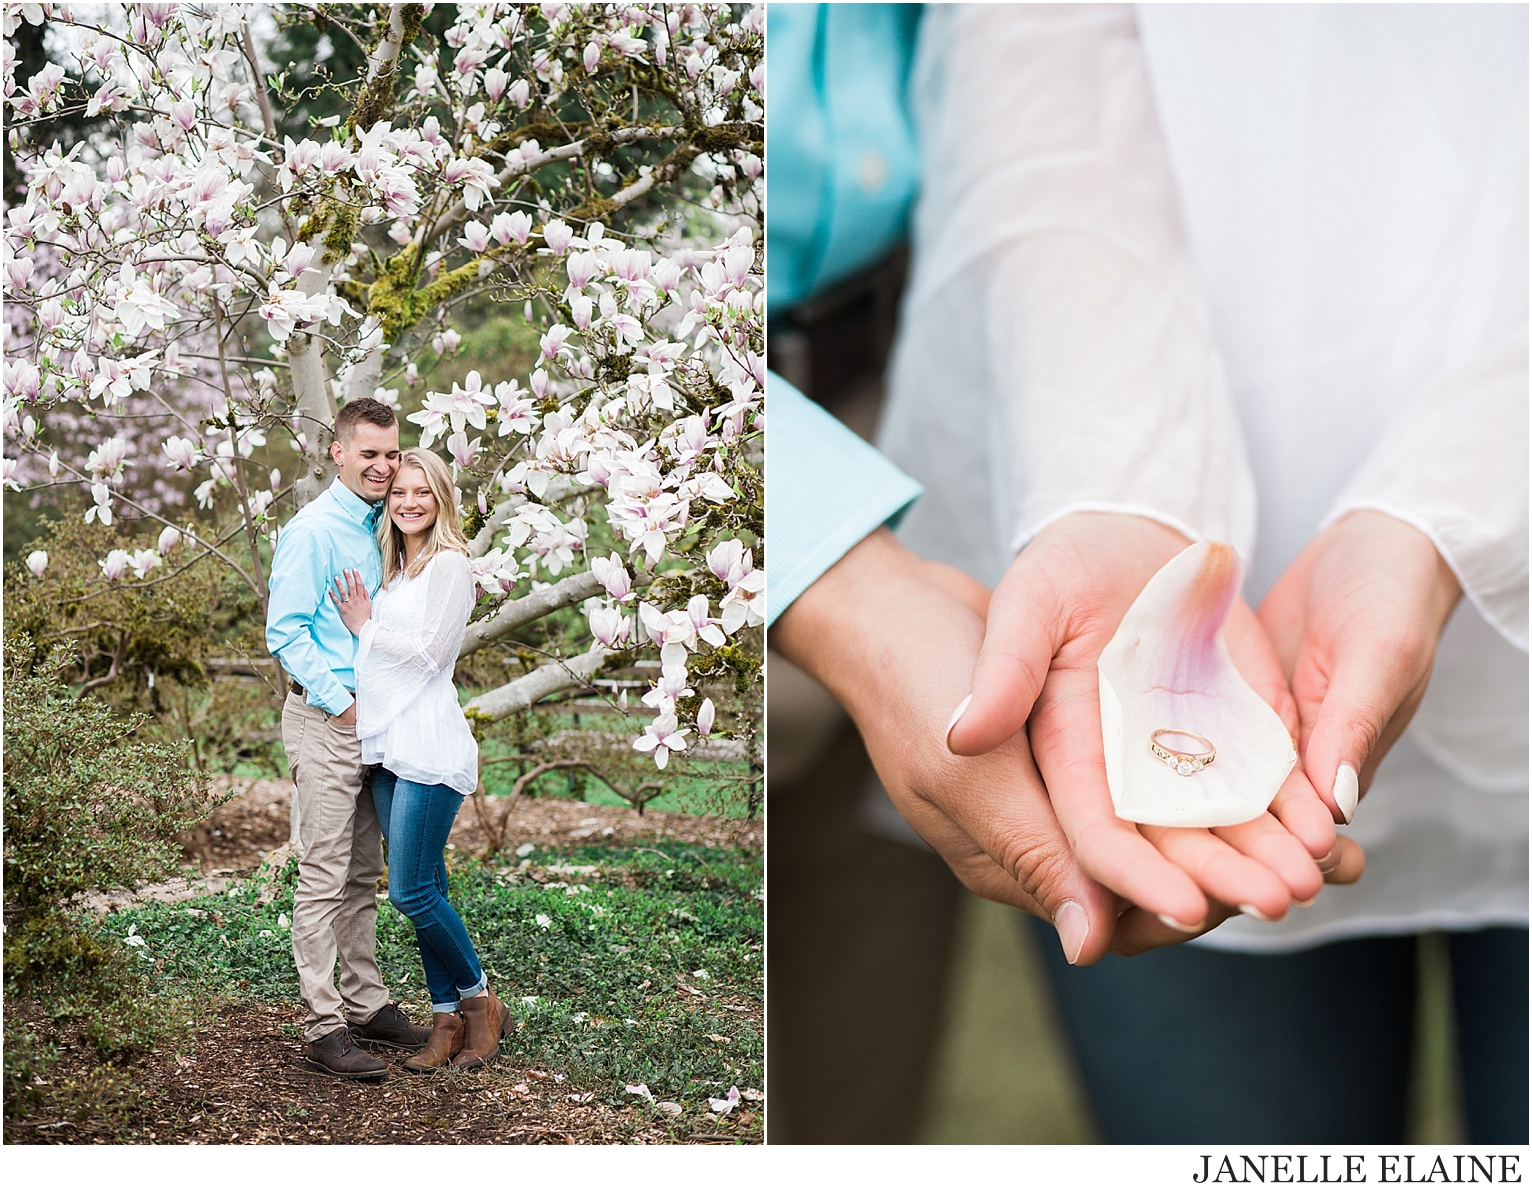 tricia and nate engagement photos-janelle elaine photography-148.jpg